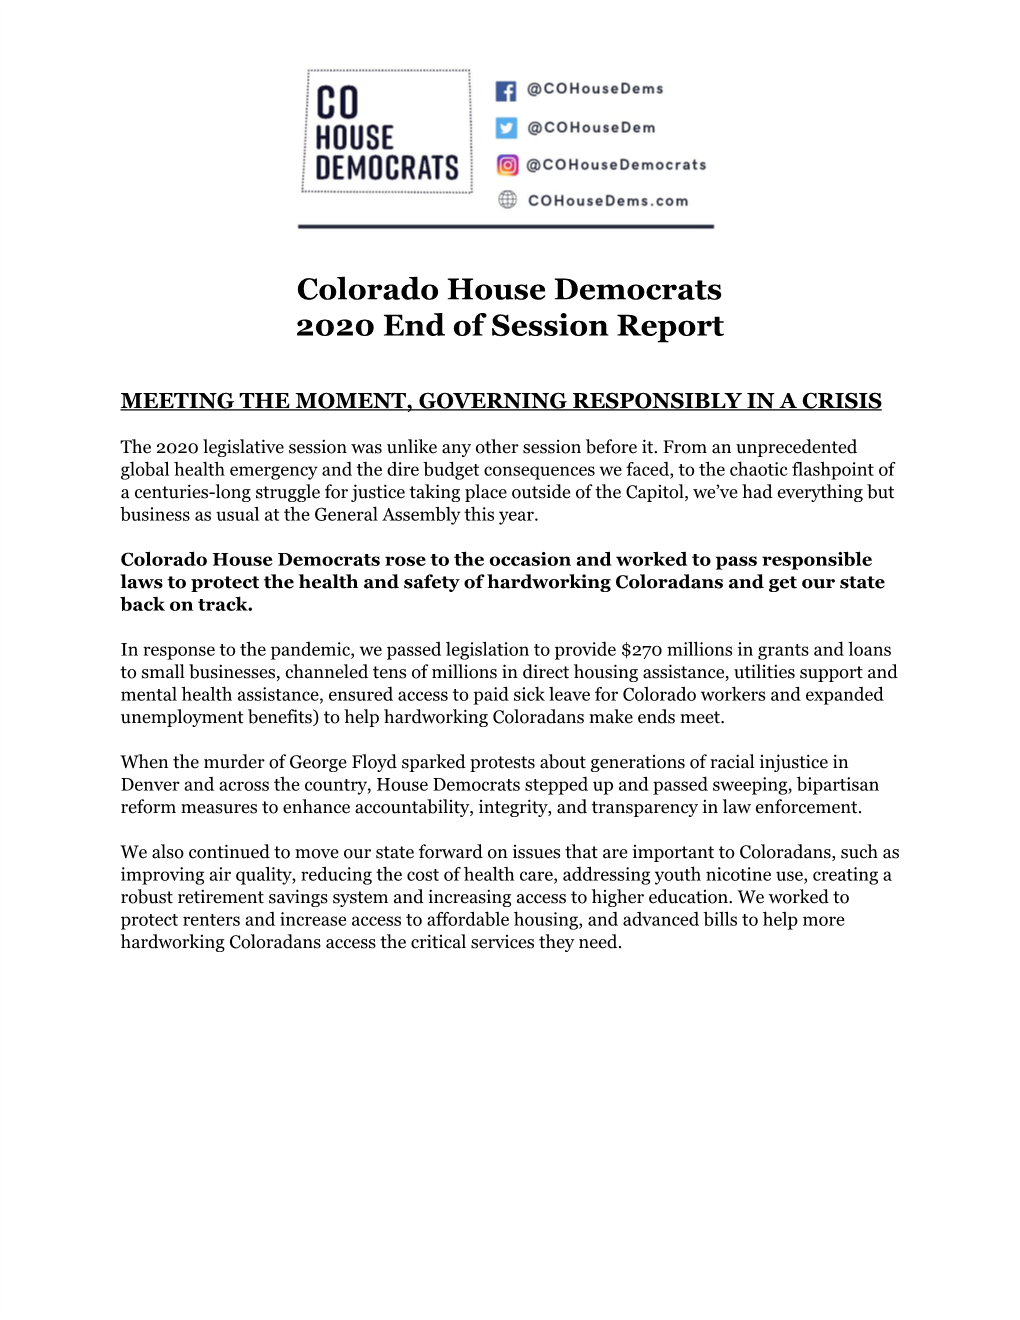 Colorado House Democrats 2020 End of Session Report